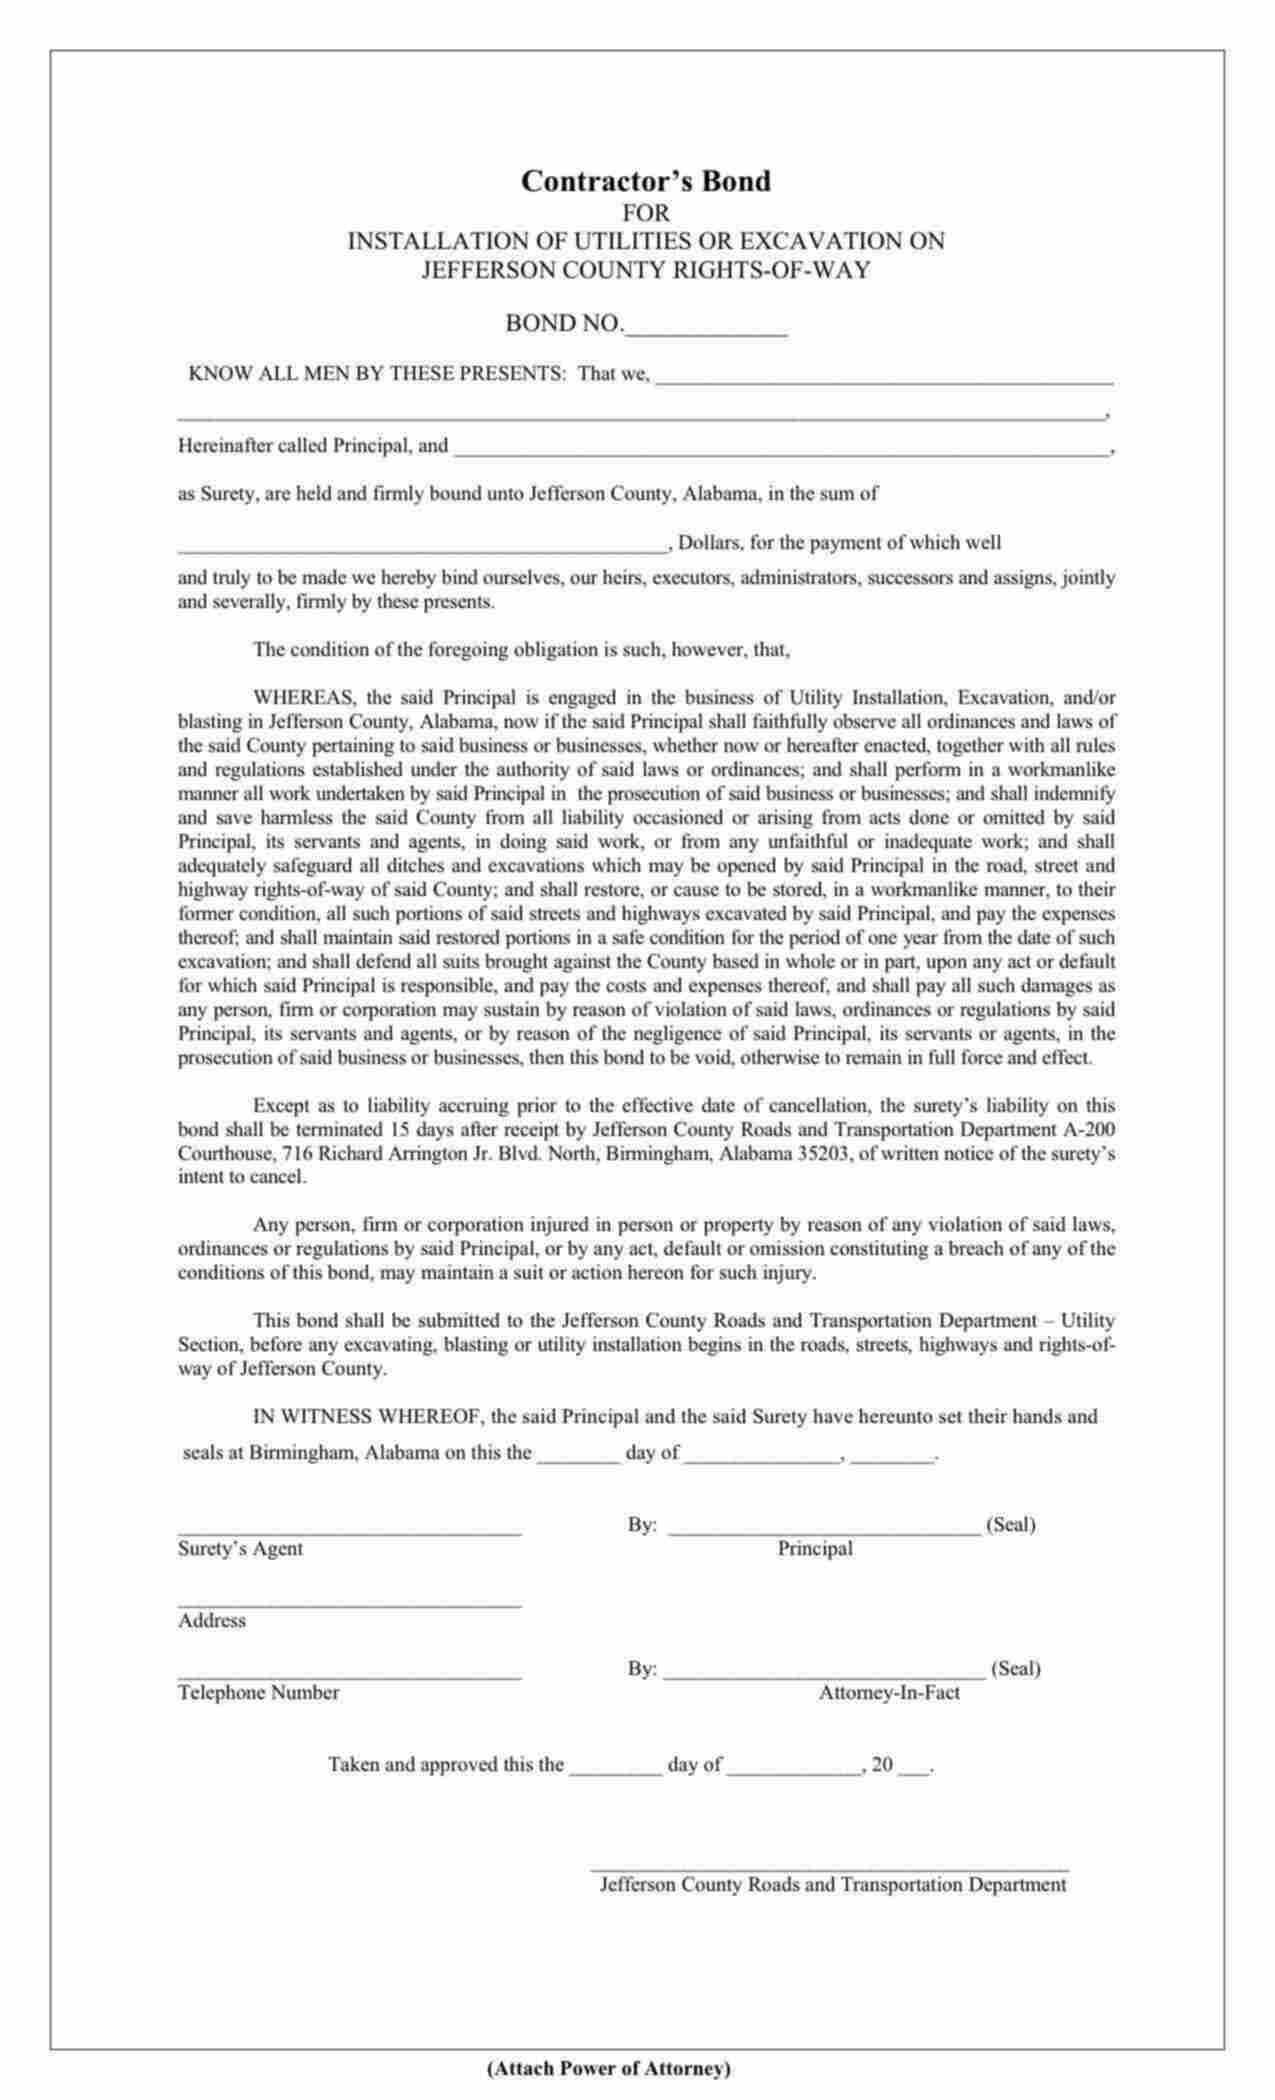 Alabama Installation of Utilities or Excavation on Right-of-Ways Bond Form